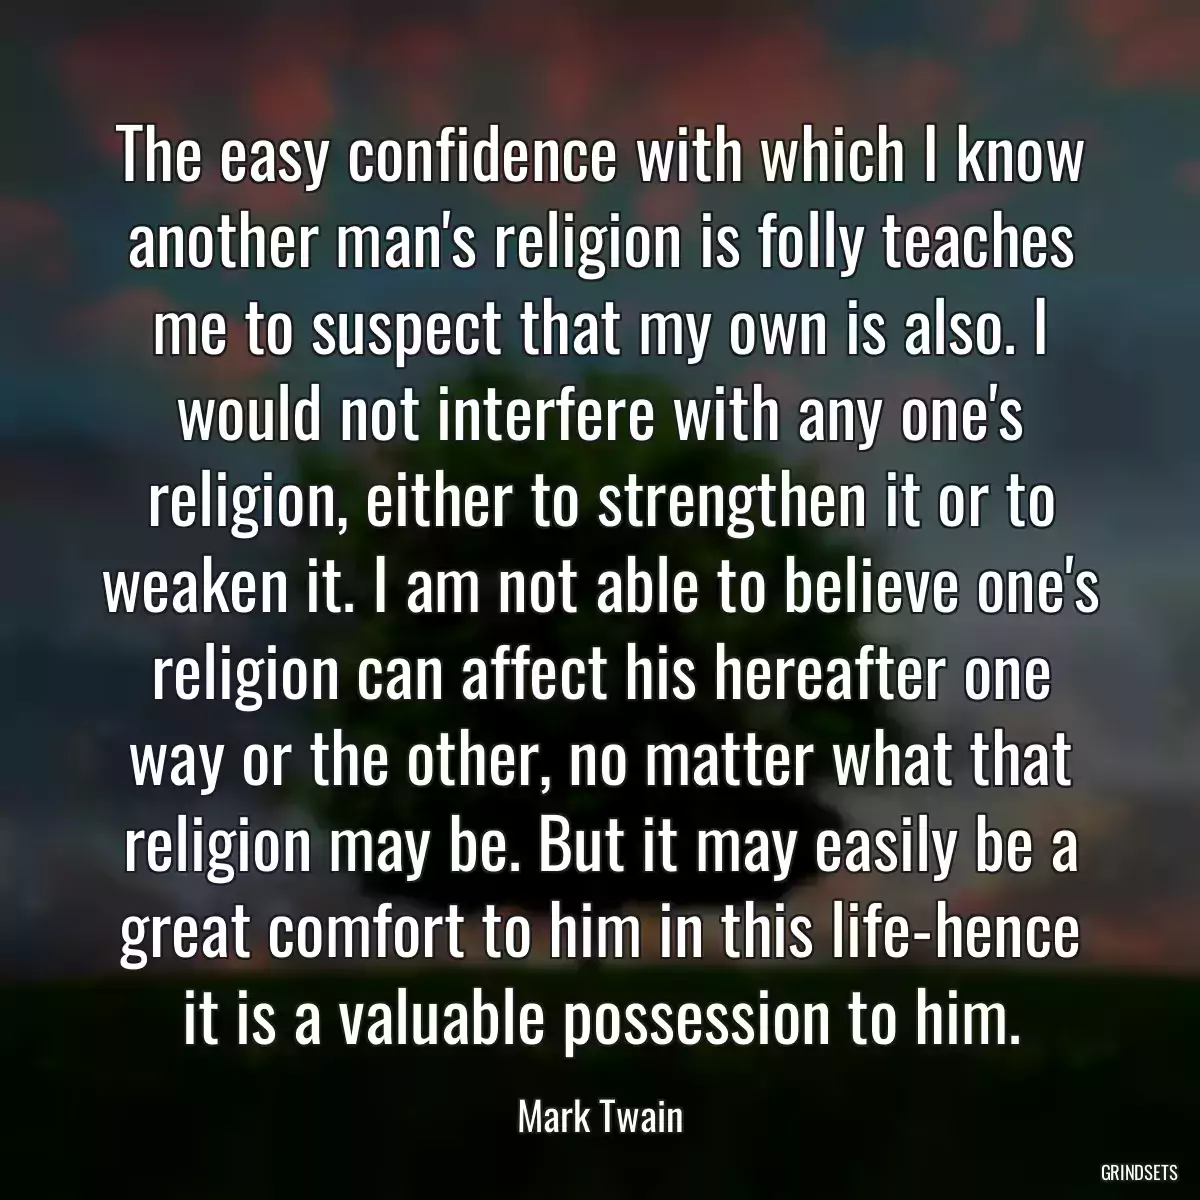 The easy confidence with which I know another man\'s religion is folly teaches me to suspect that my own is also. I would not interfere with any one\'s religion, either to strengthen it or to weaken it. I am not able to believe one\'s religion can affect his hereafter one way or the other, no matter what that religion may be. But it may easily be a great comfort to him in this life-hence it is a valuable possession to him.